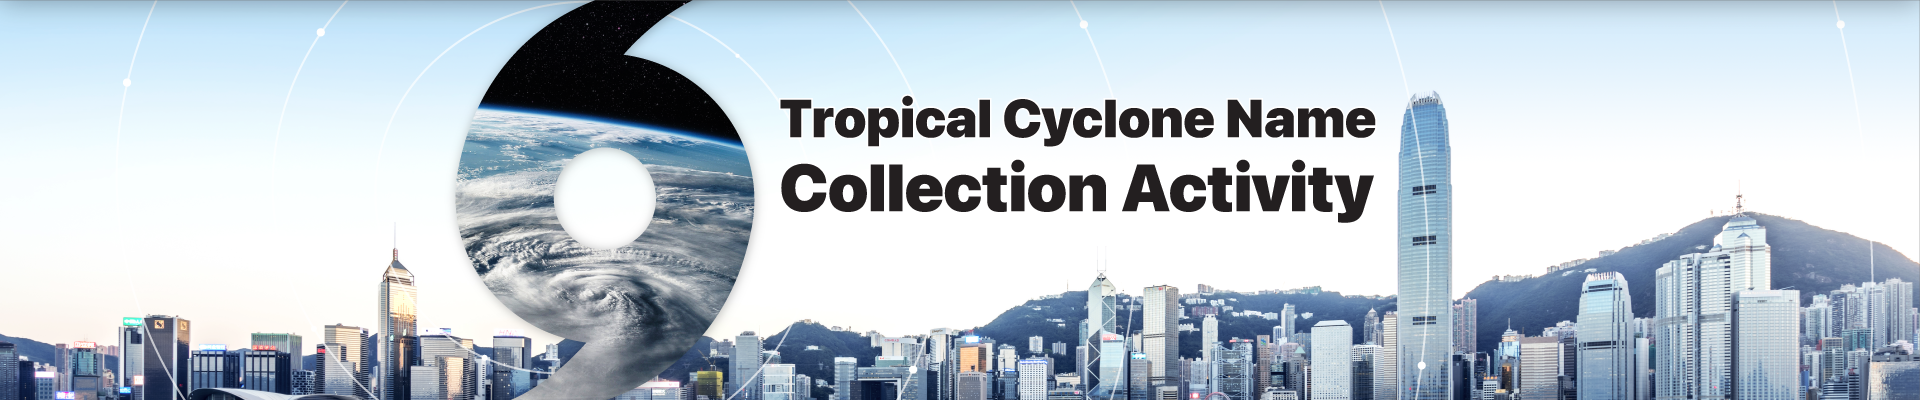 Tropical Cyclone Name Collection Activity